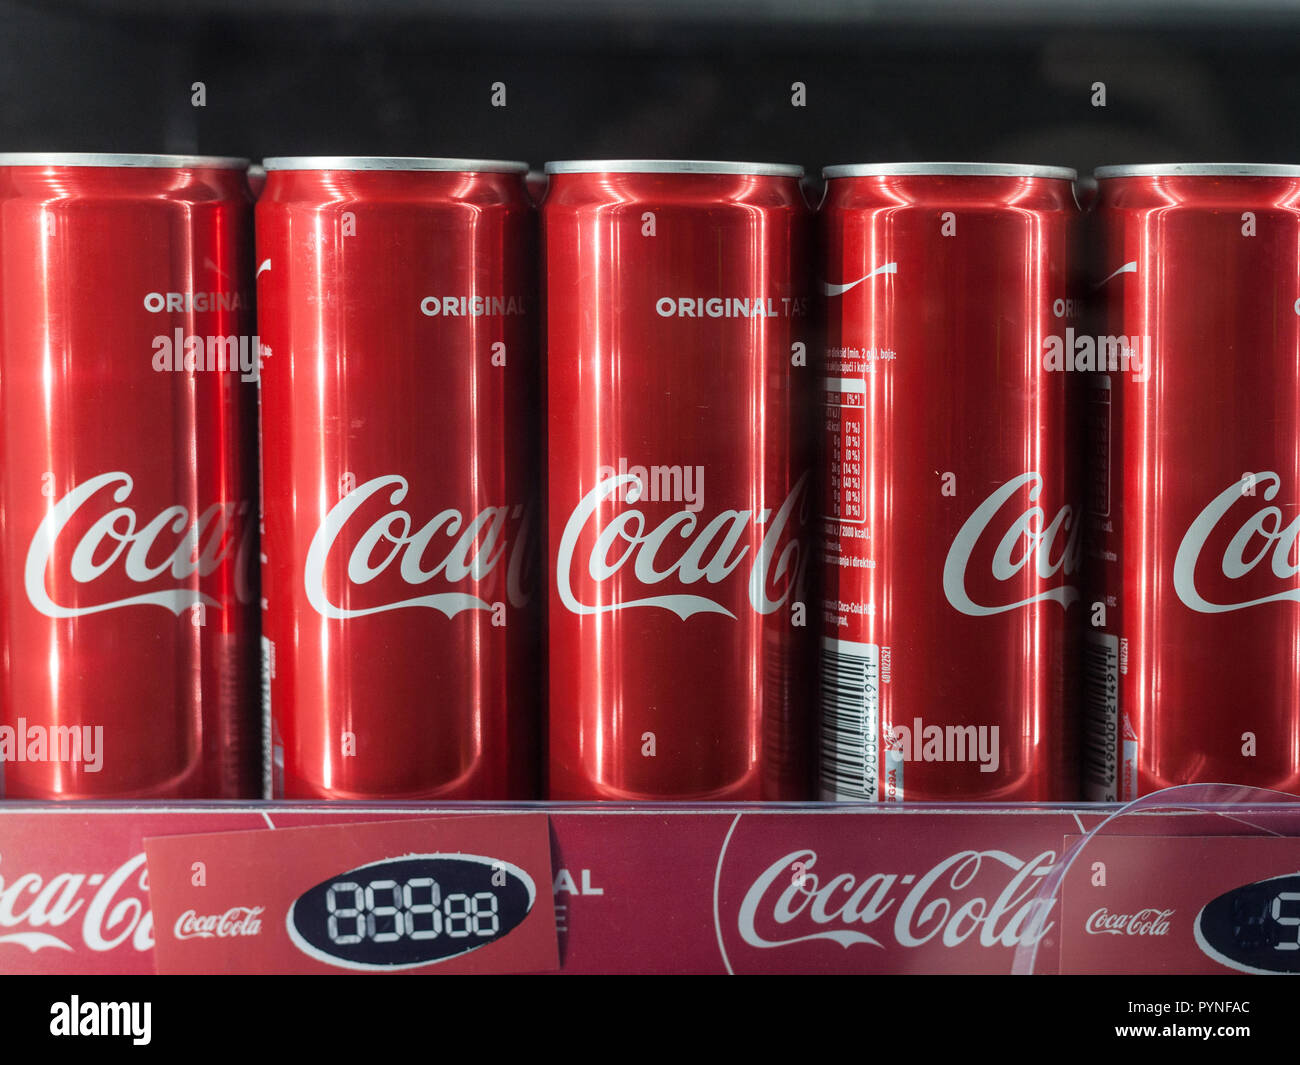 BELGRADE, SERBIA - OCTOBER 28, 2018: Coca Cola logo on cans aligned on the shelf of a fridge. Coca Cola is a soda brand of cola, the most sold in the  Stock Photo